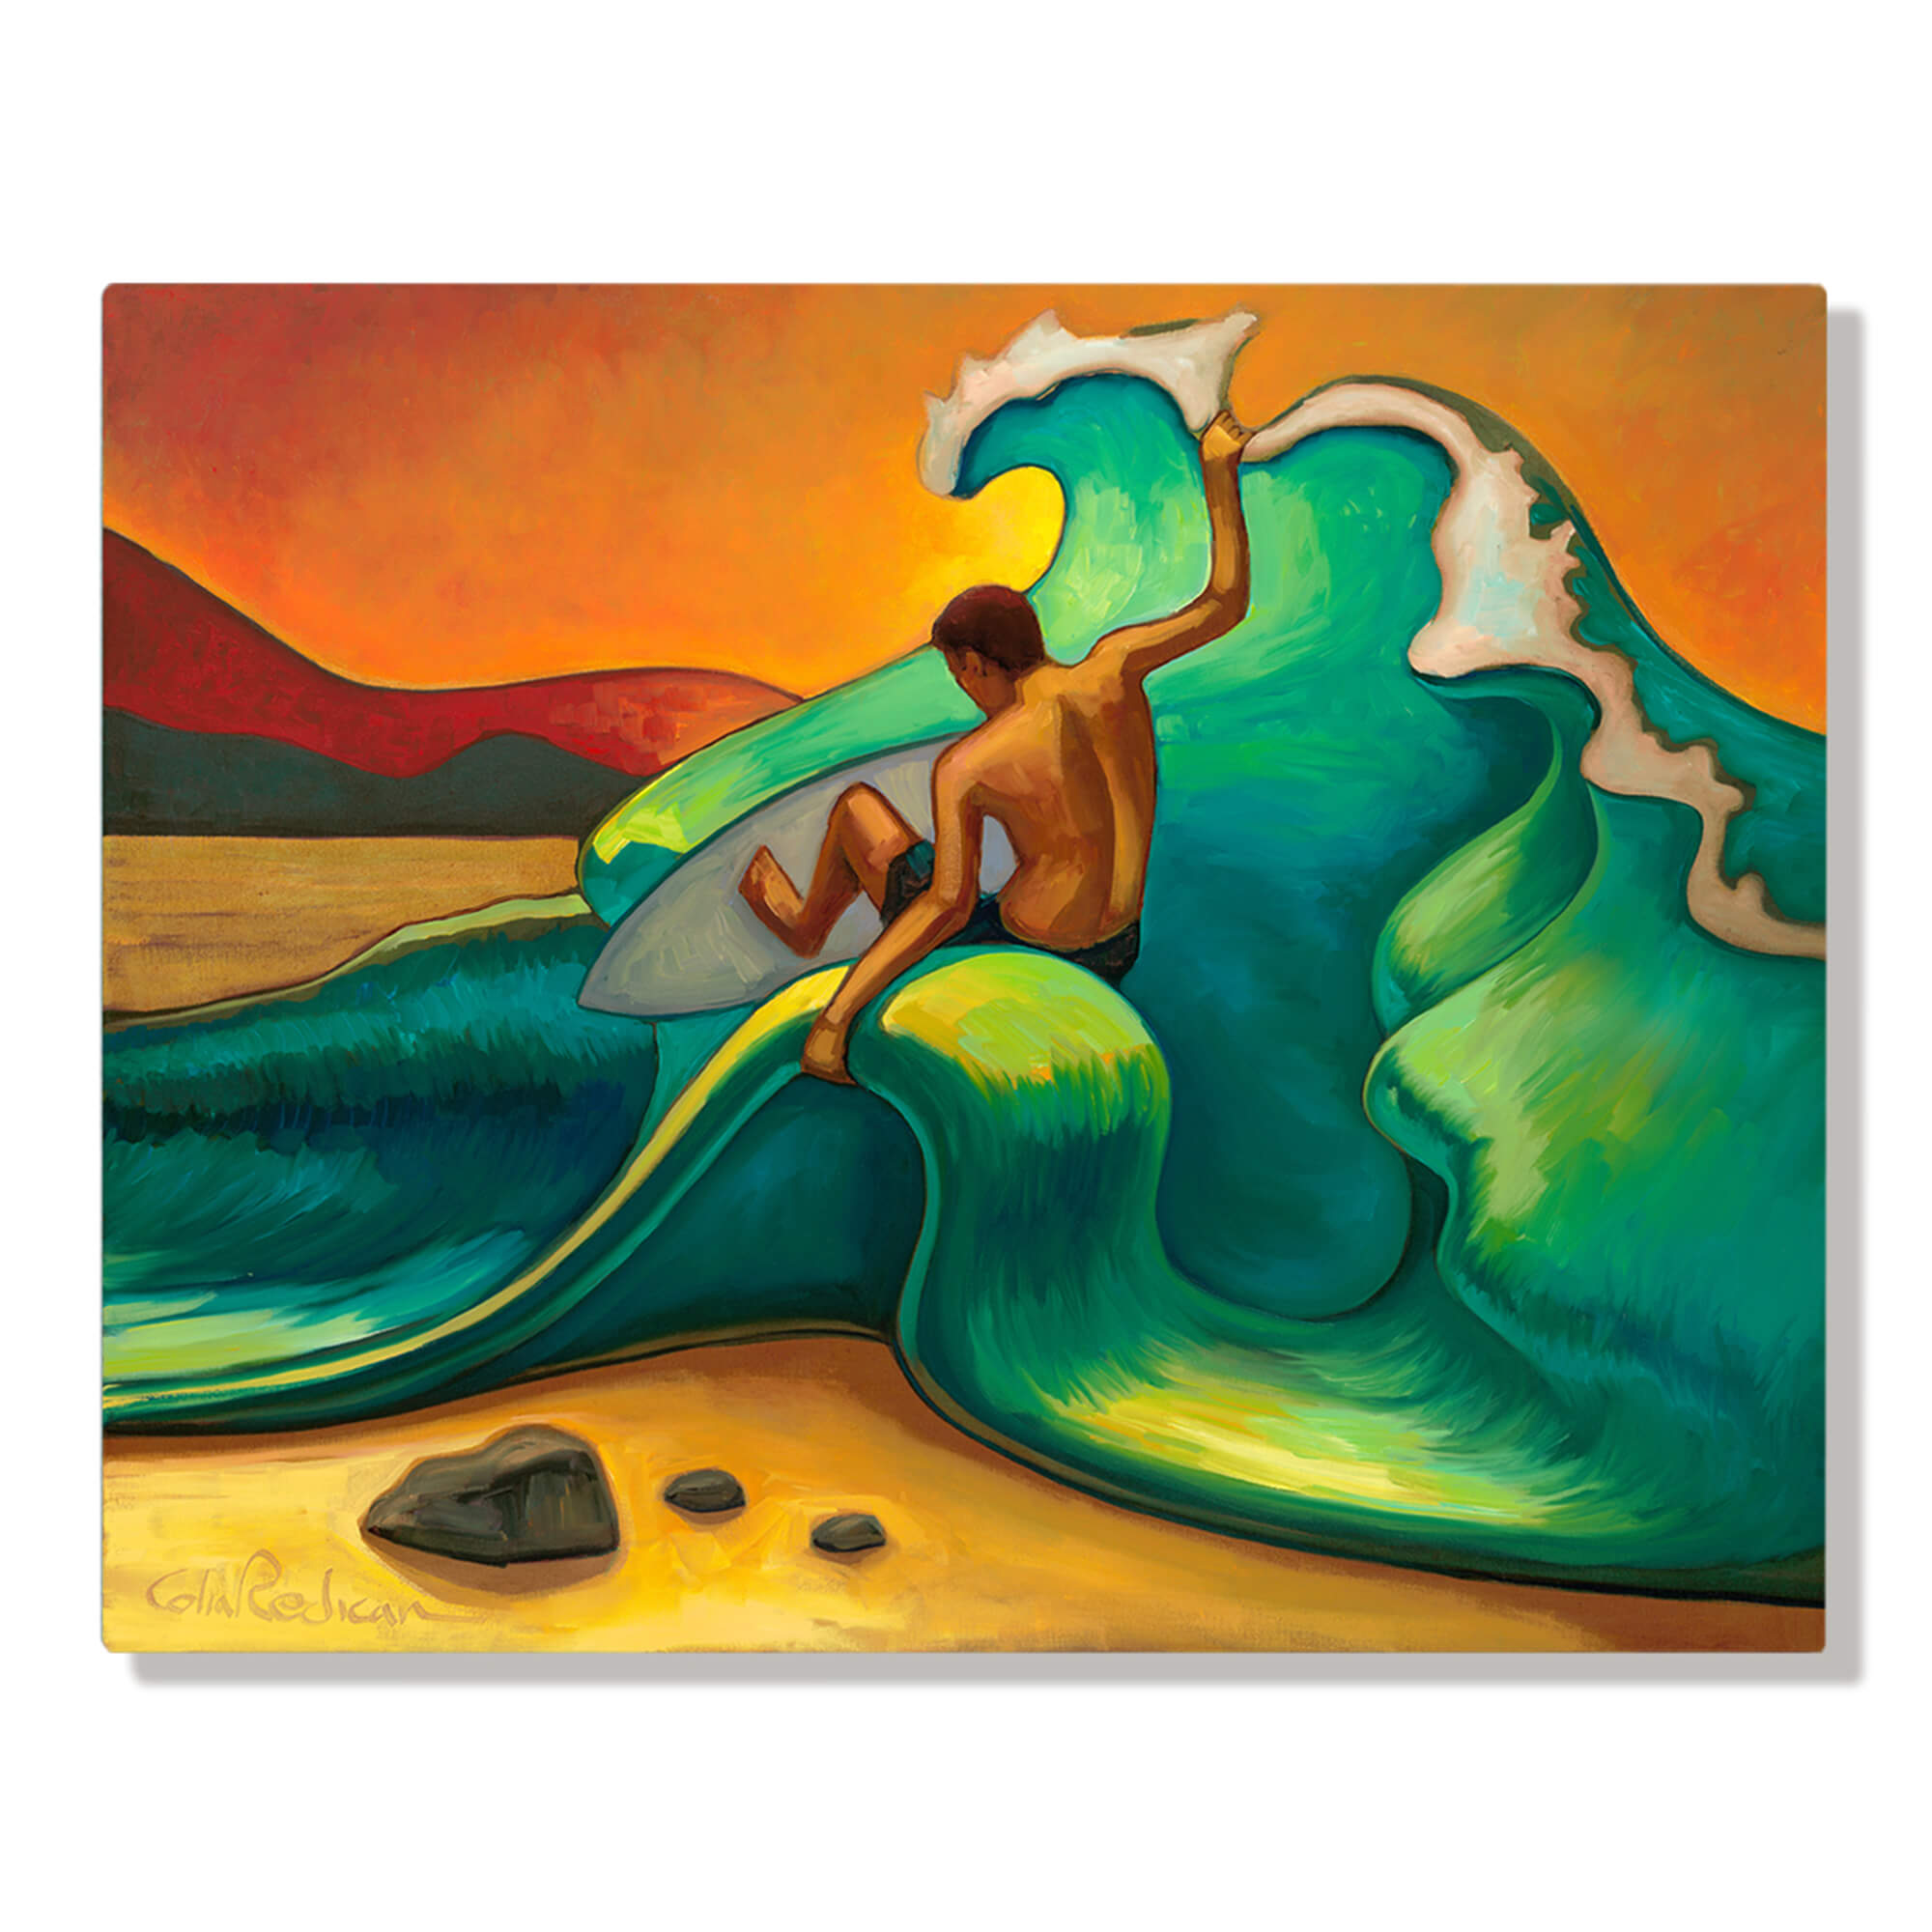 A riding the epic waves of Hawaii by Hawaii artist Colin Redican